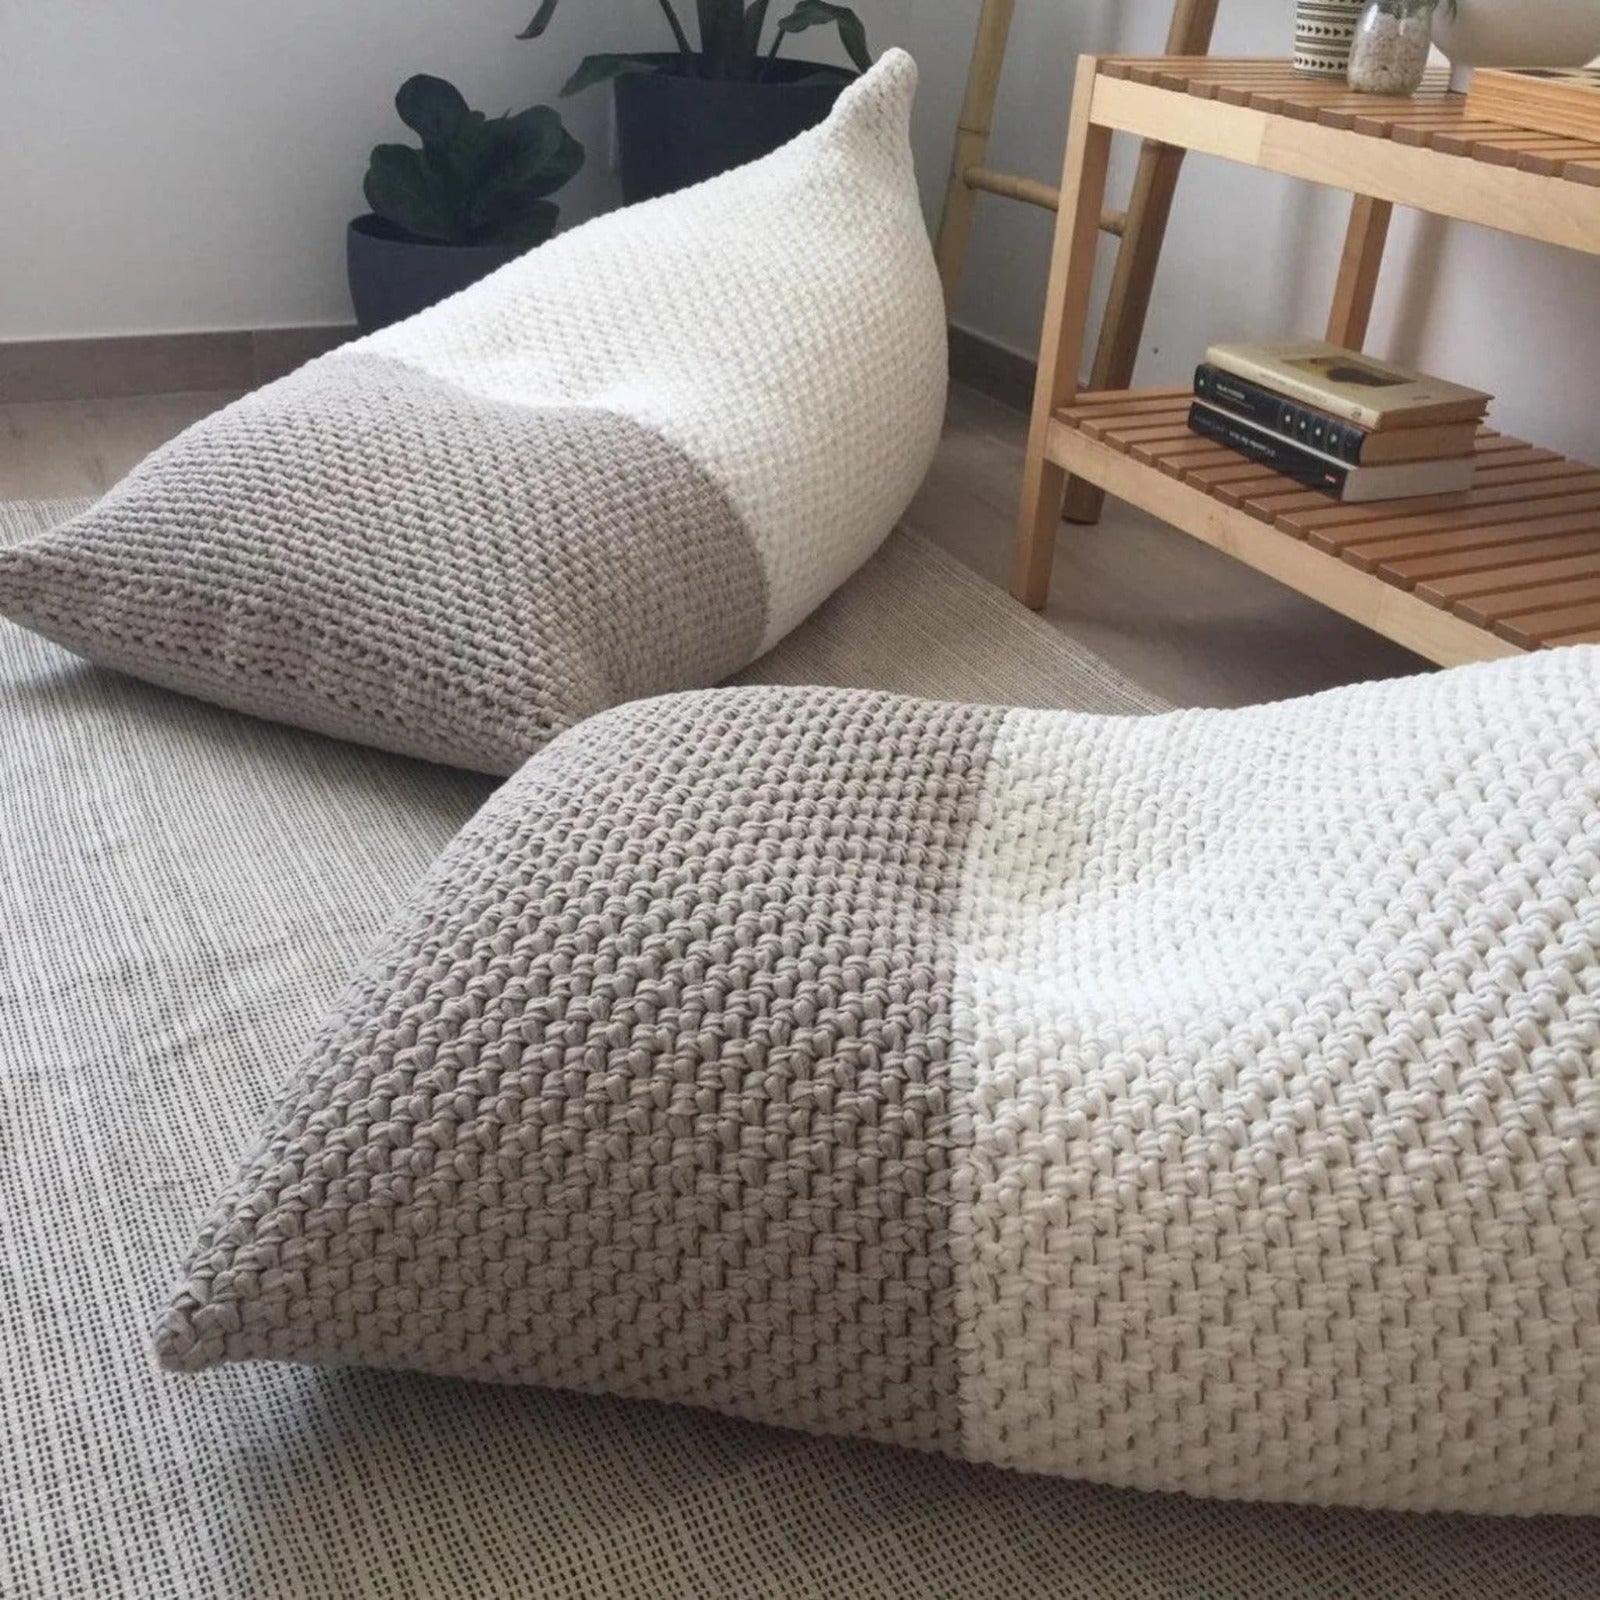 Wool Cushion for Poang Chair with Removable Cover